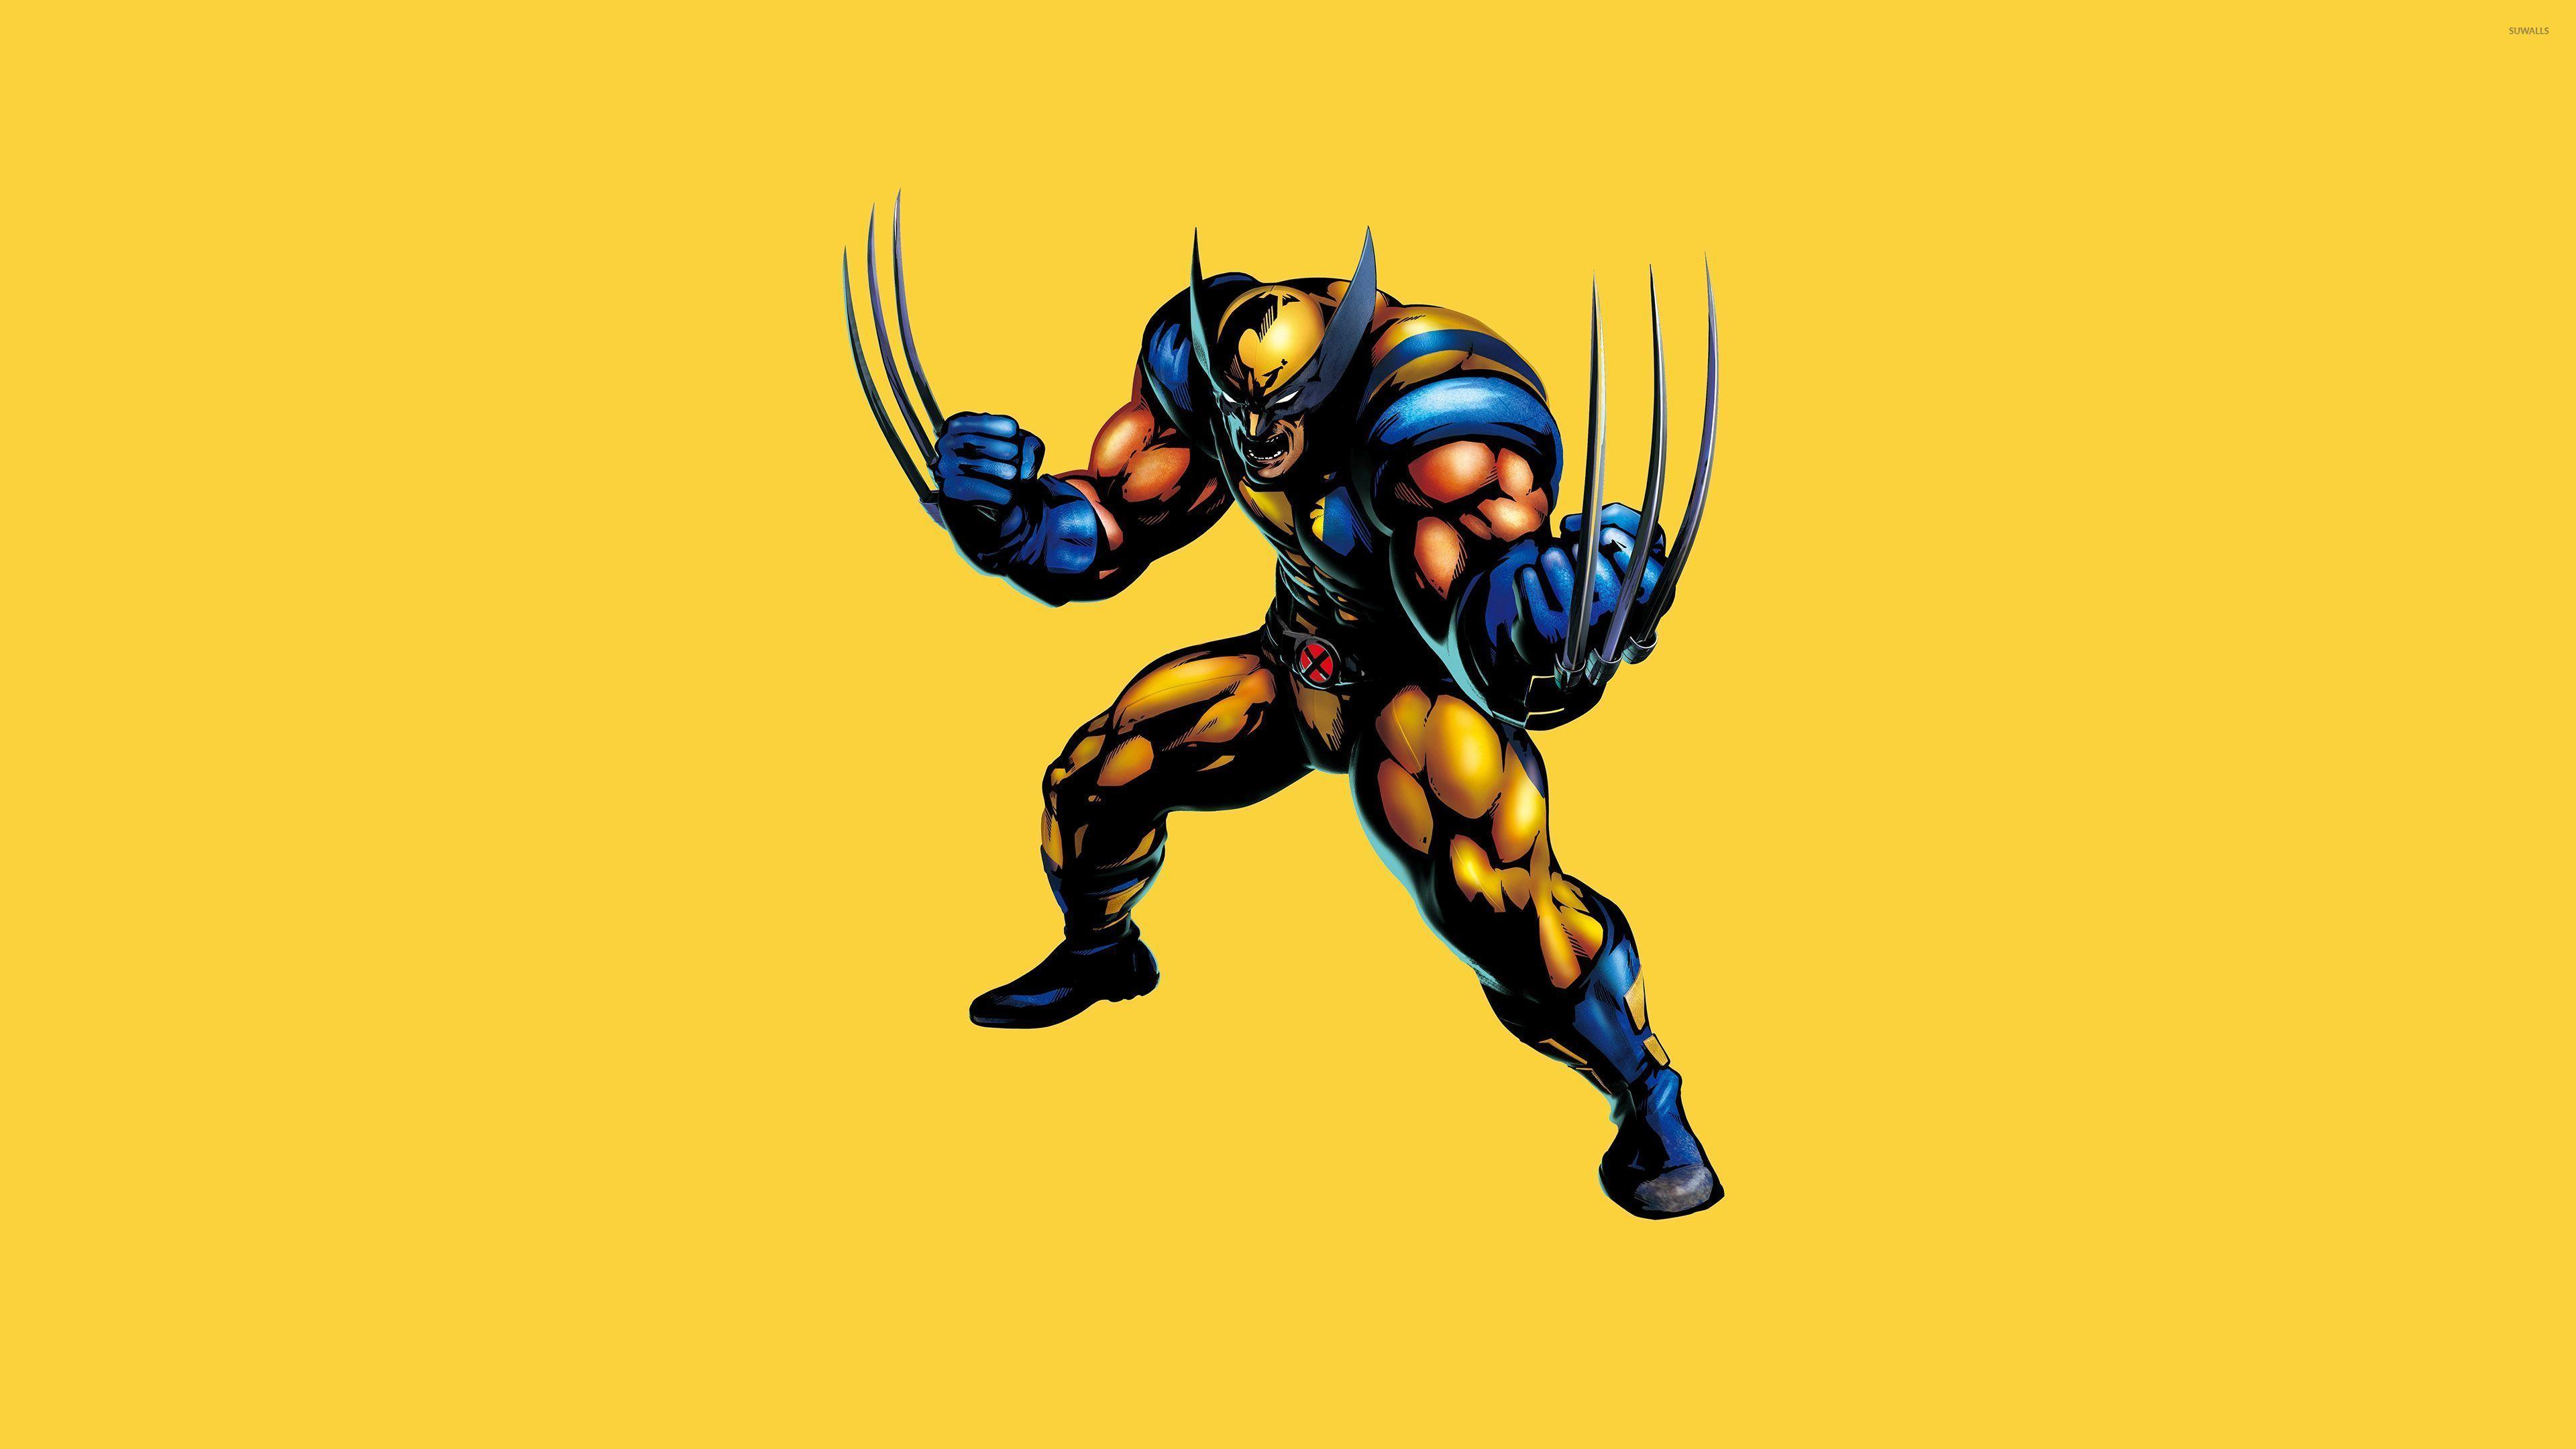 Wolverine ready for a fight wallpaper wallpaper